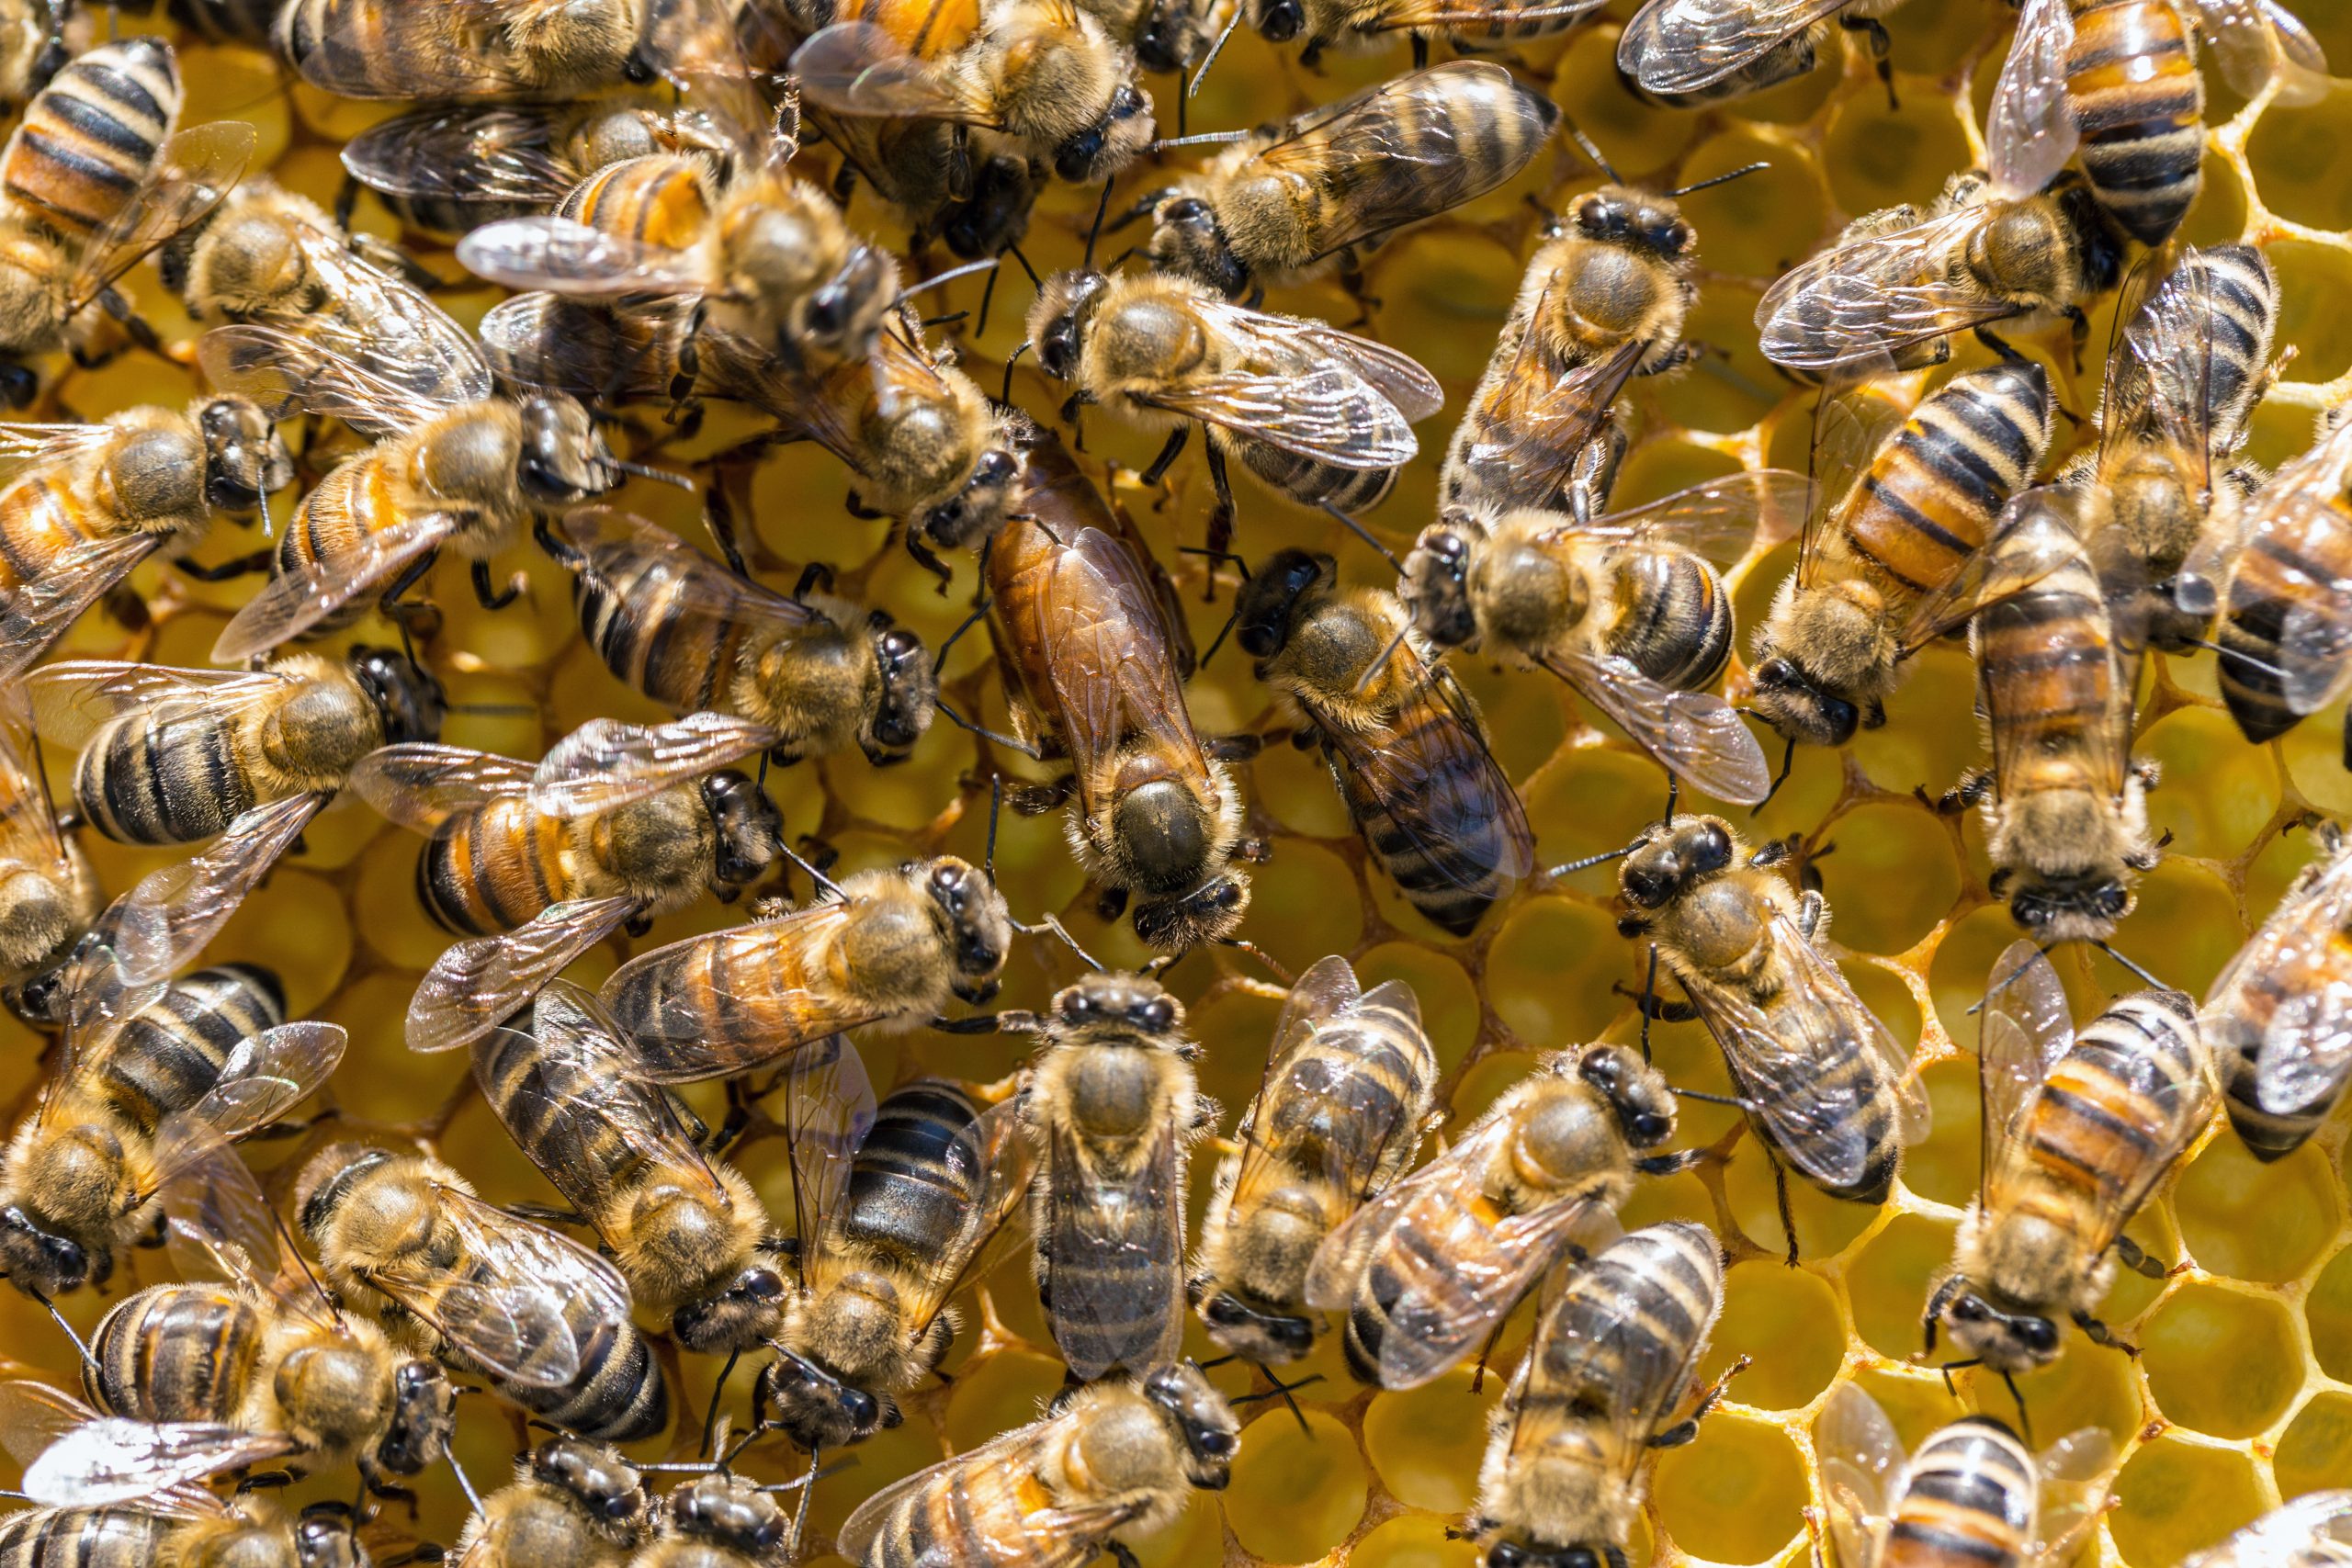 Queen Honeybees Hurt by Extreme Temperature Changes